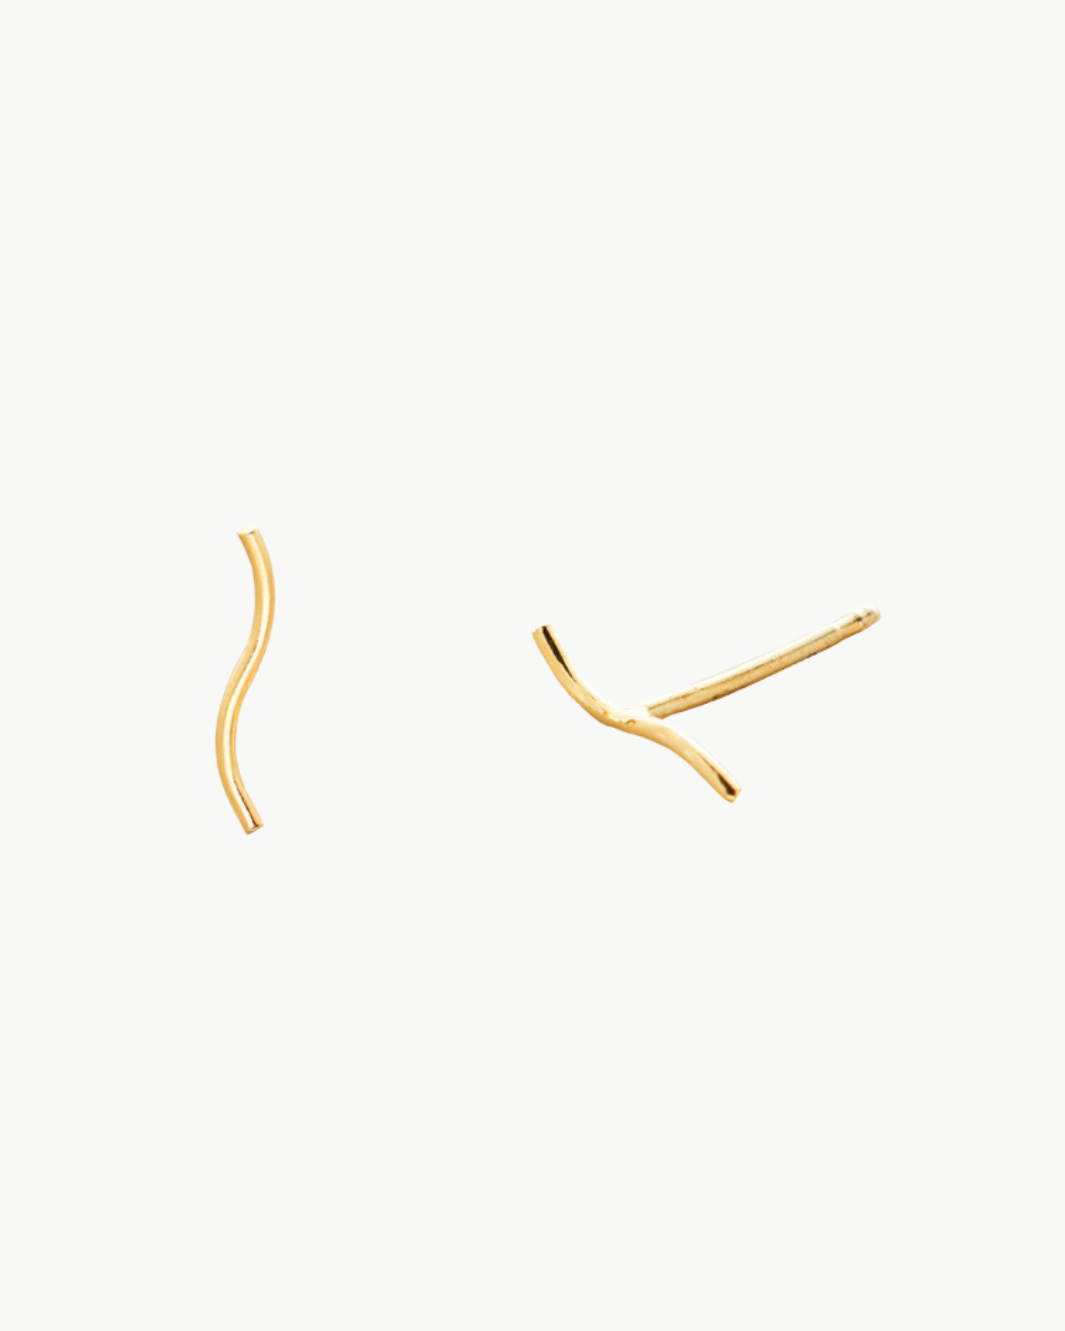 CURVE BAR STUD EARRINGS IN GOLD - Romi Boutique